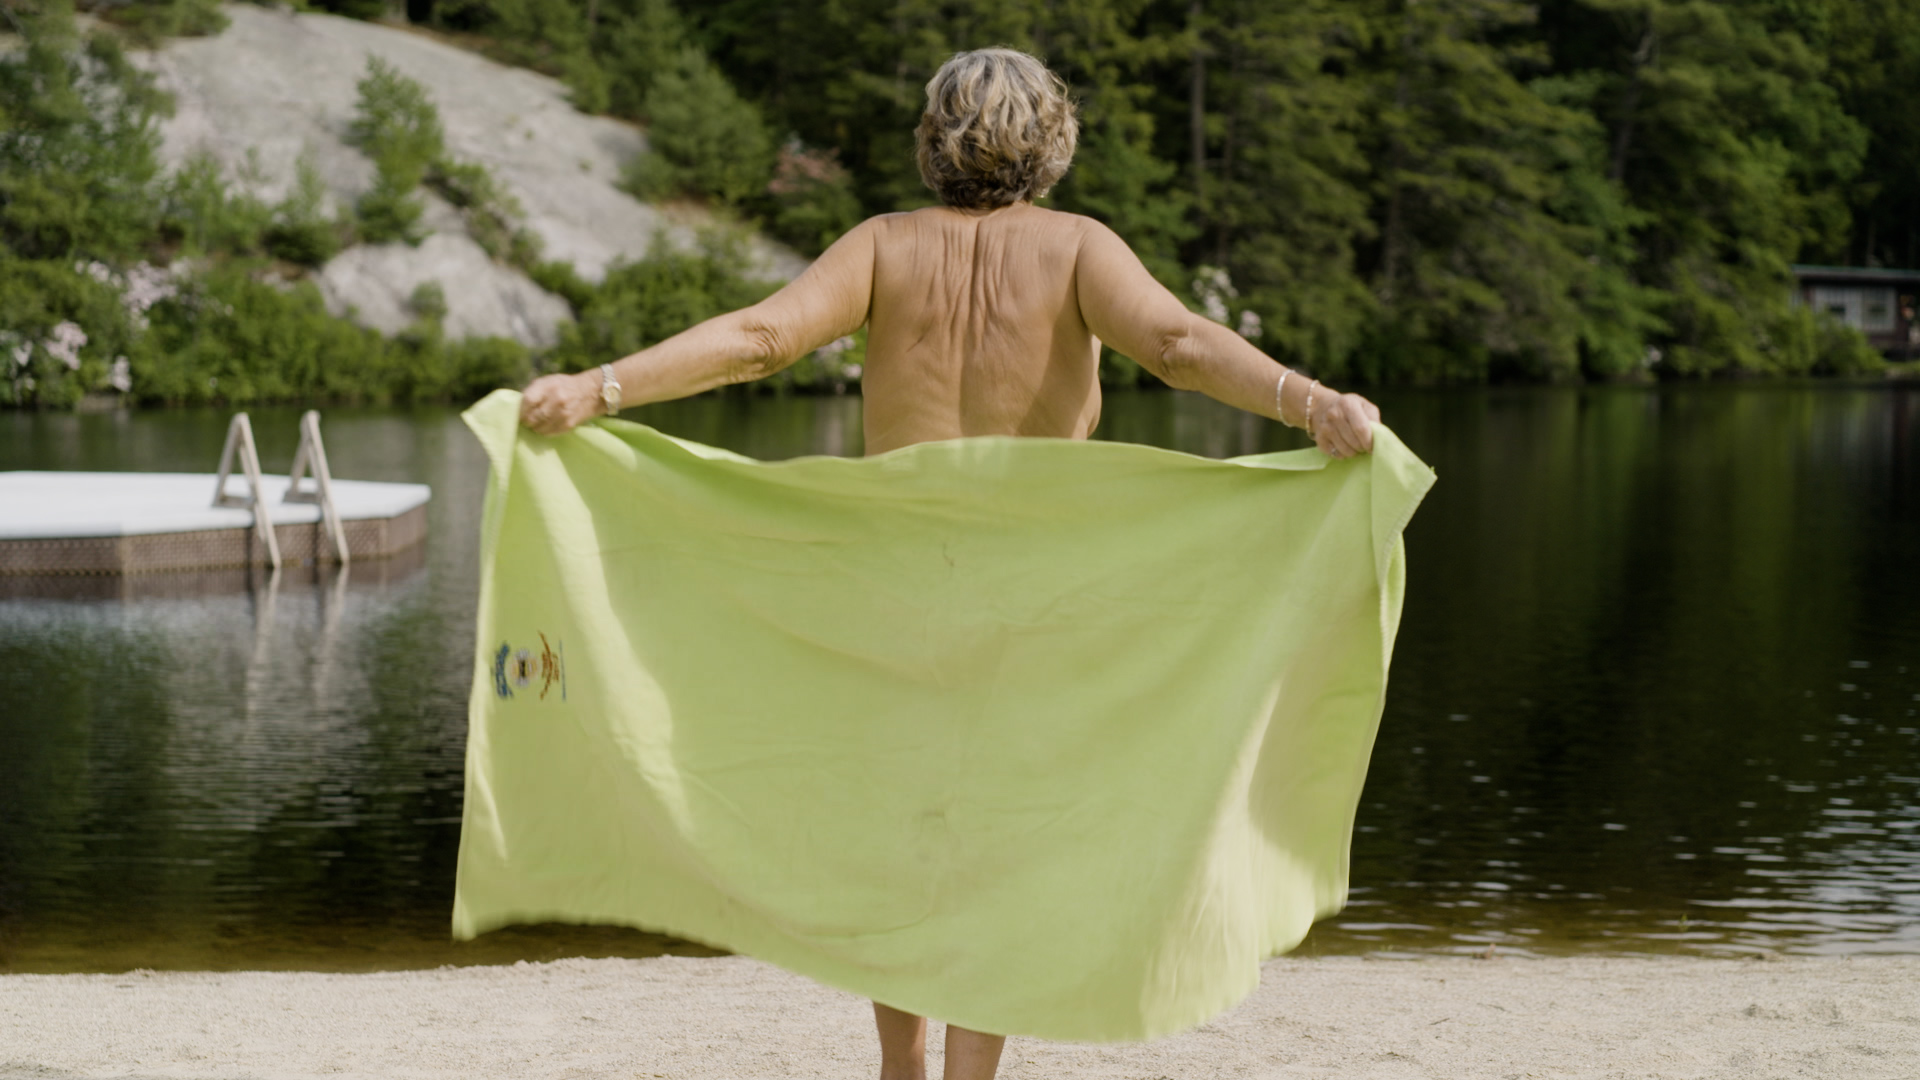 Nude Beach Horney - Nudist explains what you should definitely not do at a nude beach - CNN  Video